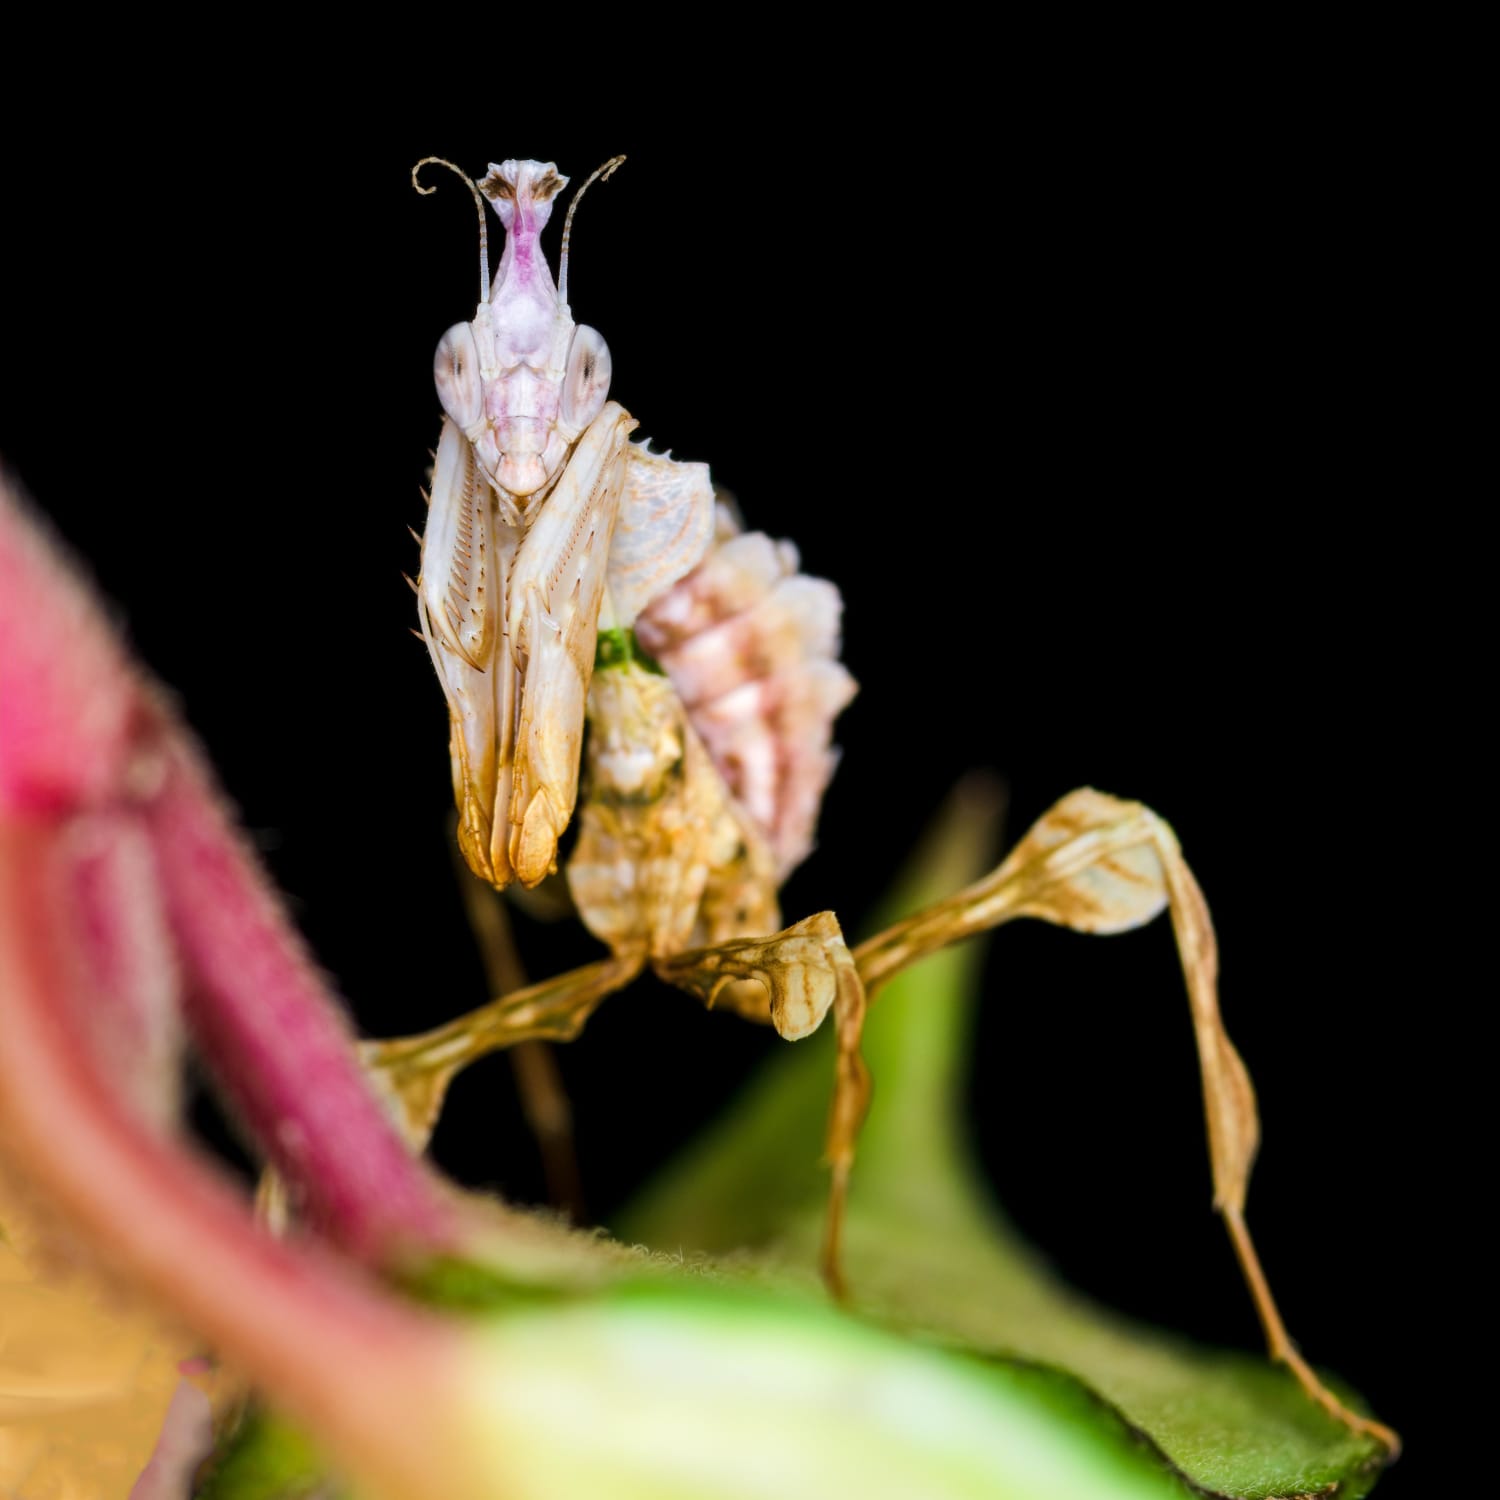 No ID needed, just wanted yall to meet Taz the Giant Devil Flower Mantis nymph (Idolomantis diabolica)